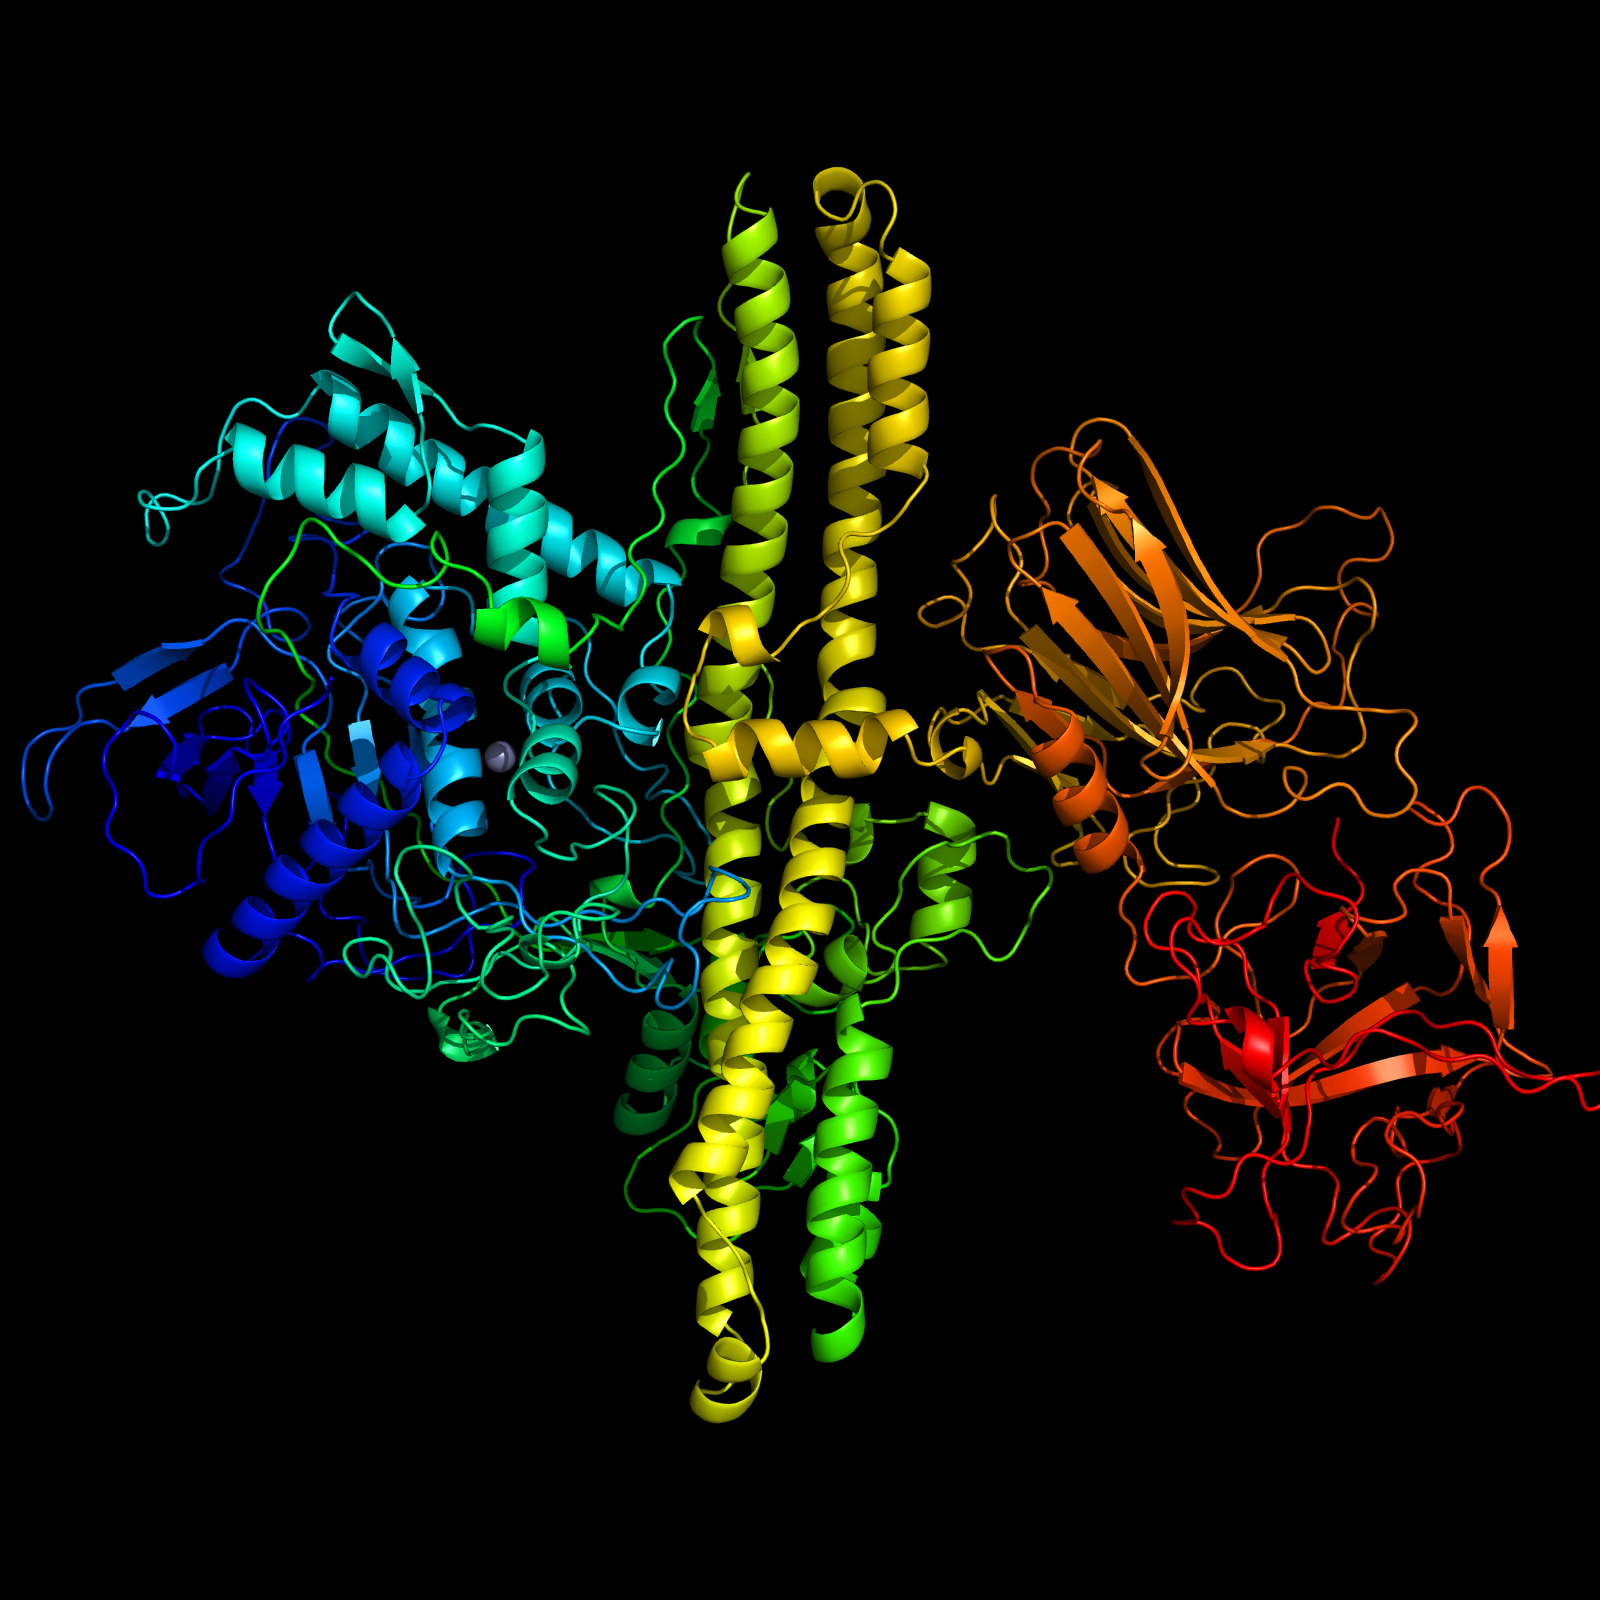 Figure 1: Protein strucutre  of the homology model of botulinum neurotoxin c based on class B neurotoxin. The light chain of the proteins is defined as the globular domain on the left of the picture (blue), with a central zinc ion (grey). The remaining part of the protein is defined as the heavy chain